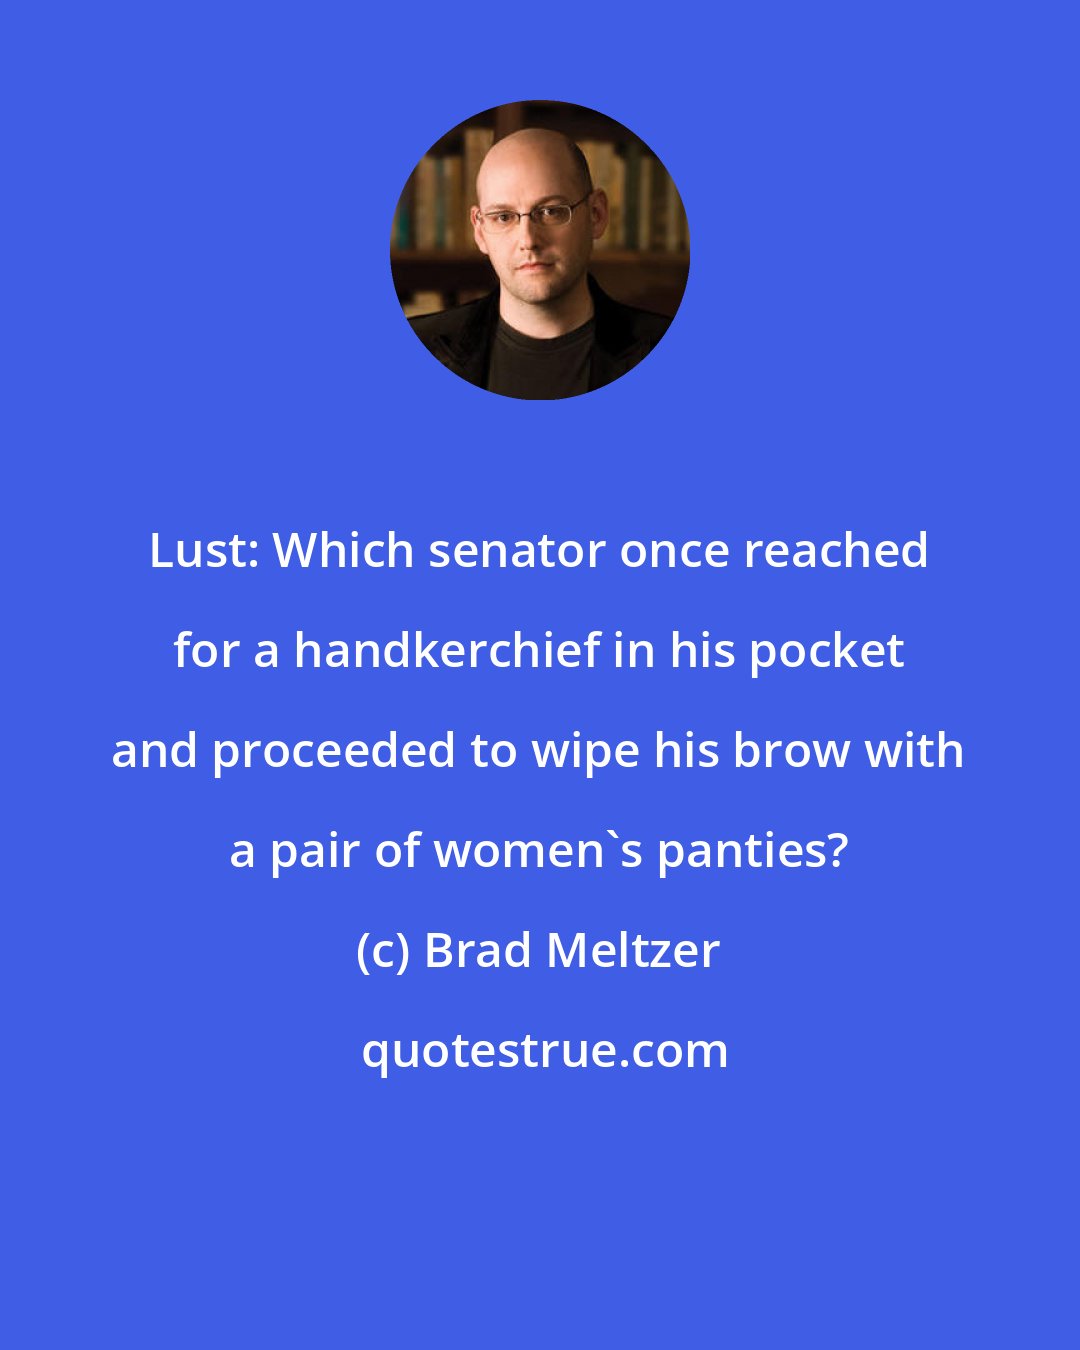 Brad Meltzer: Lust: Which senator once reached for a handkerchief in his pocket and proceeded to wipe his brow with a pair of women's panties?